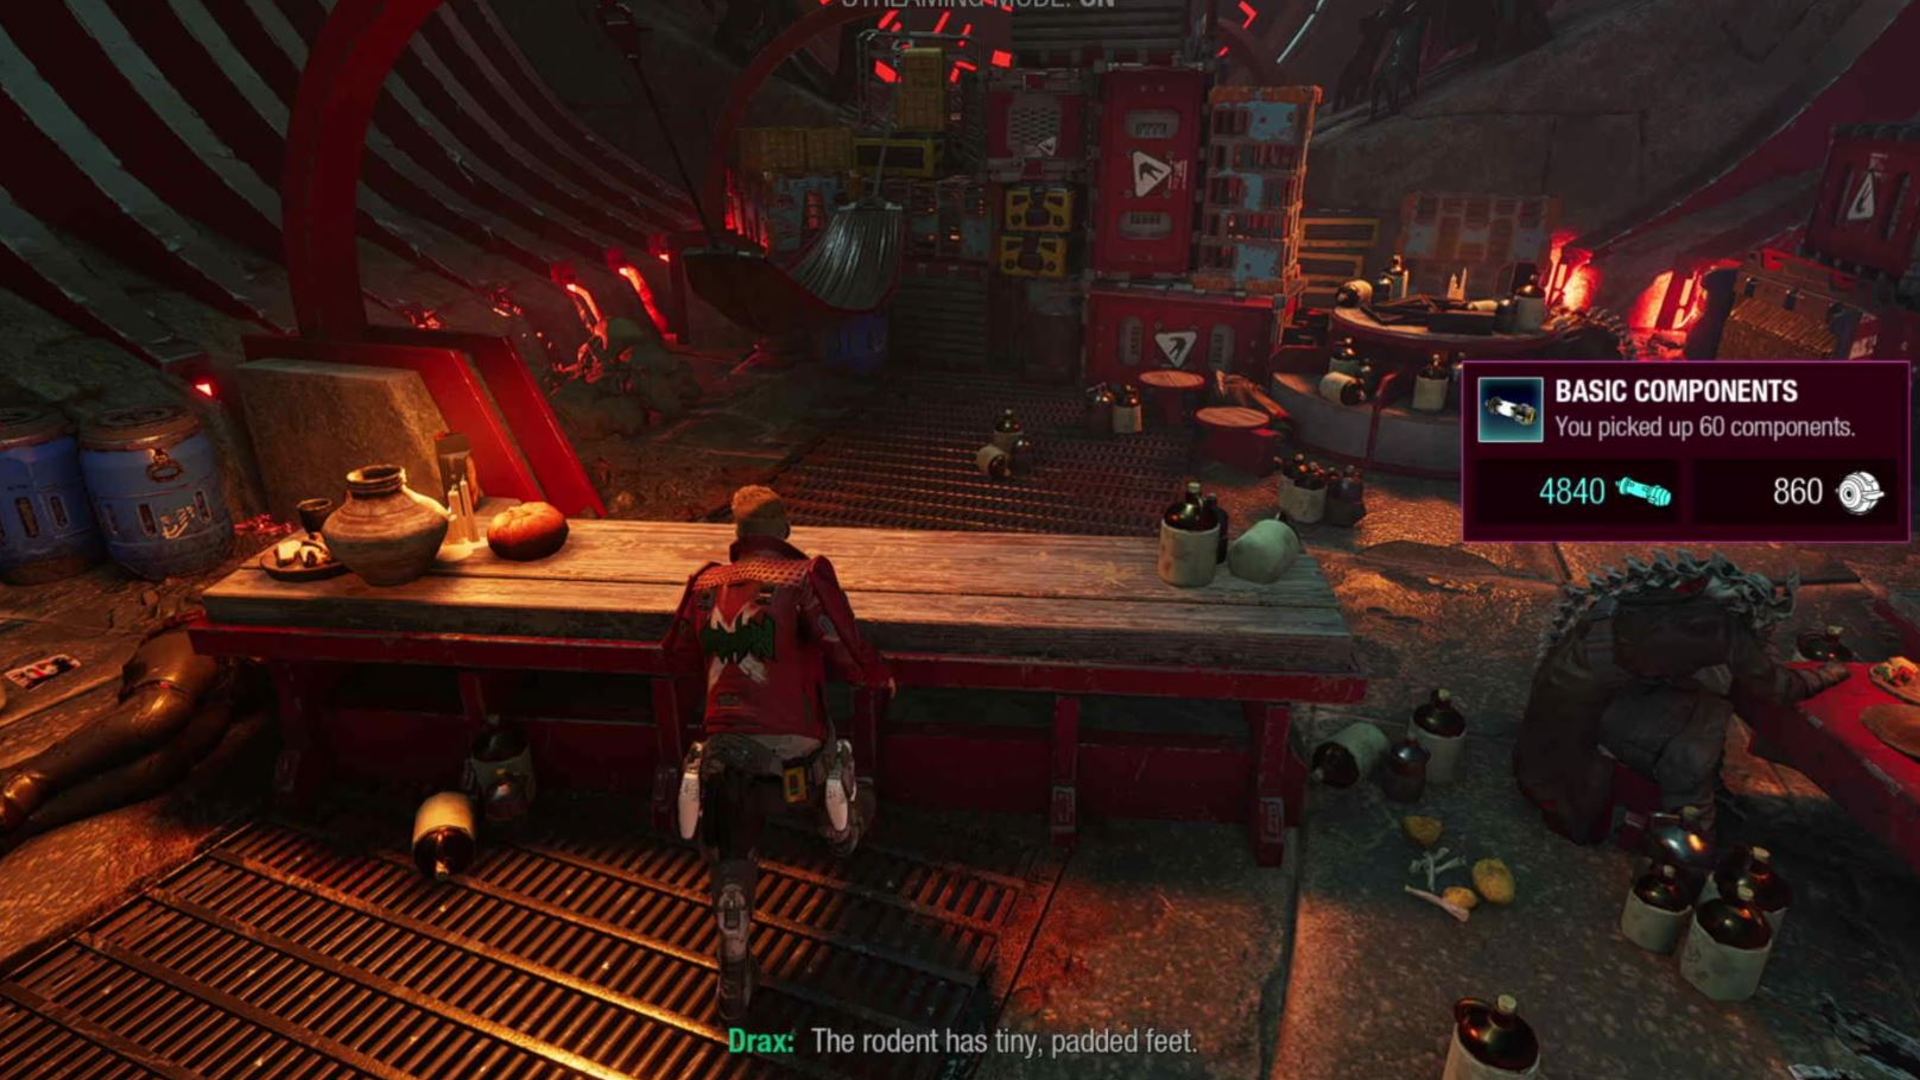 Guardians of the Galaxy outfit locations: Star-Lord can be seen looking at a bench which leads down the path to the outfit box.